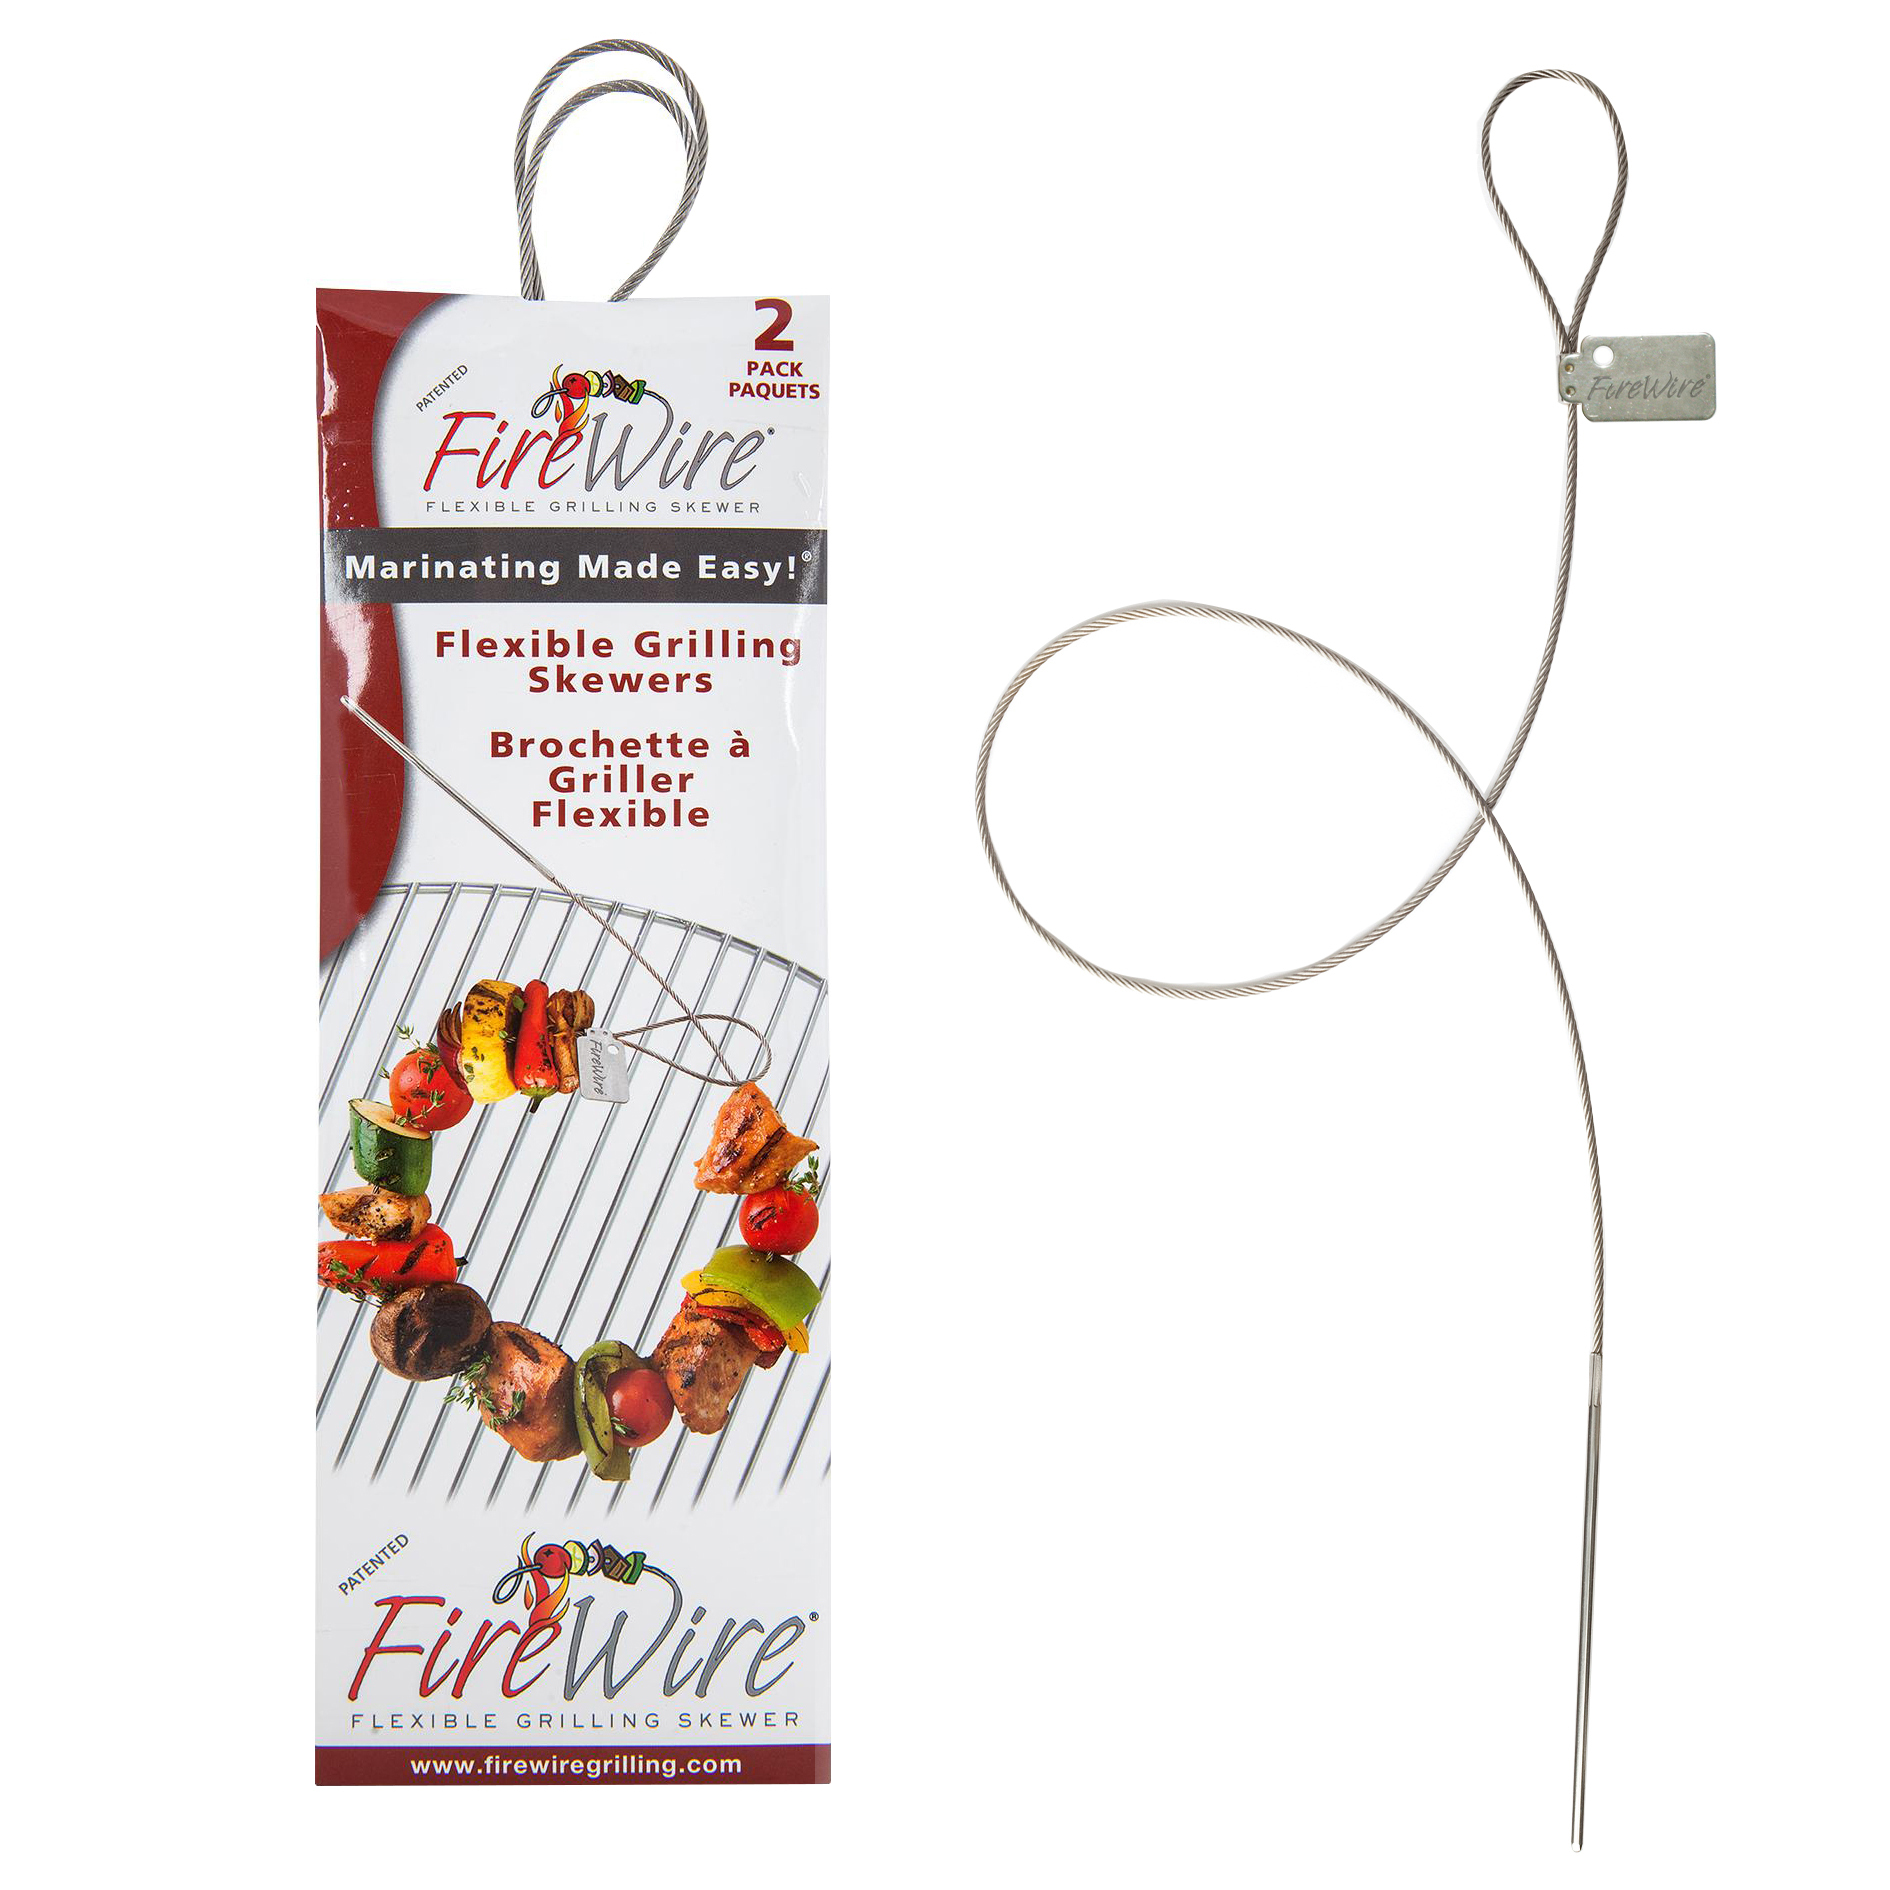 1 SET of 2 FLEXIBLE PATENTED FIRE WIRE GRILLING SKEWERS 